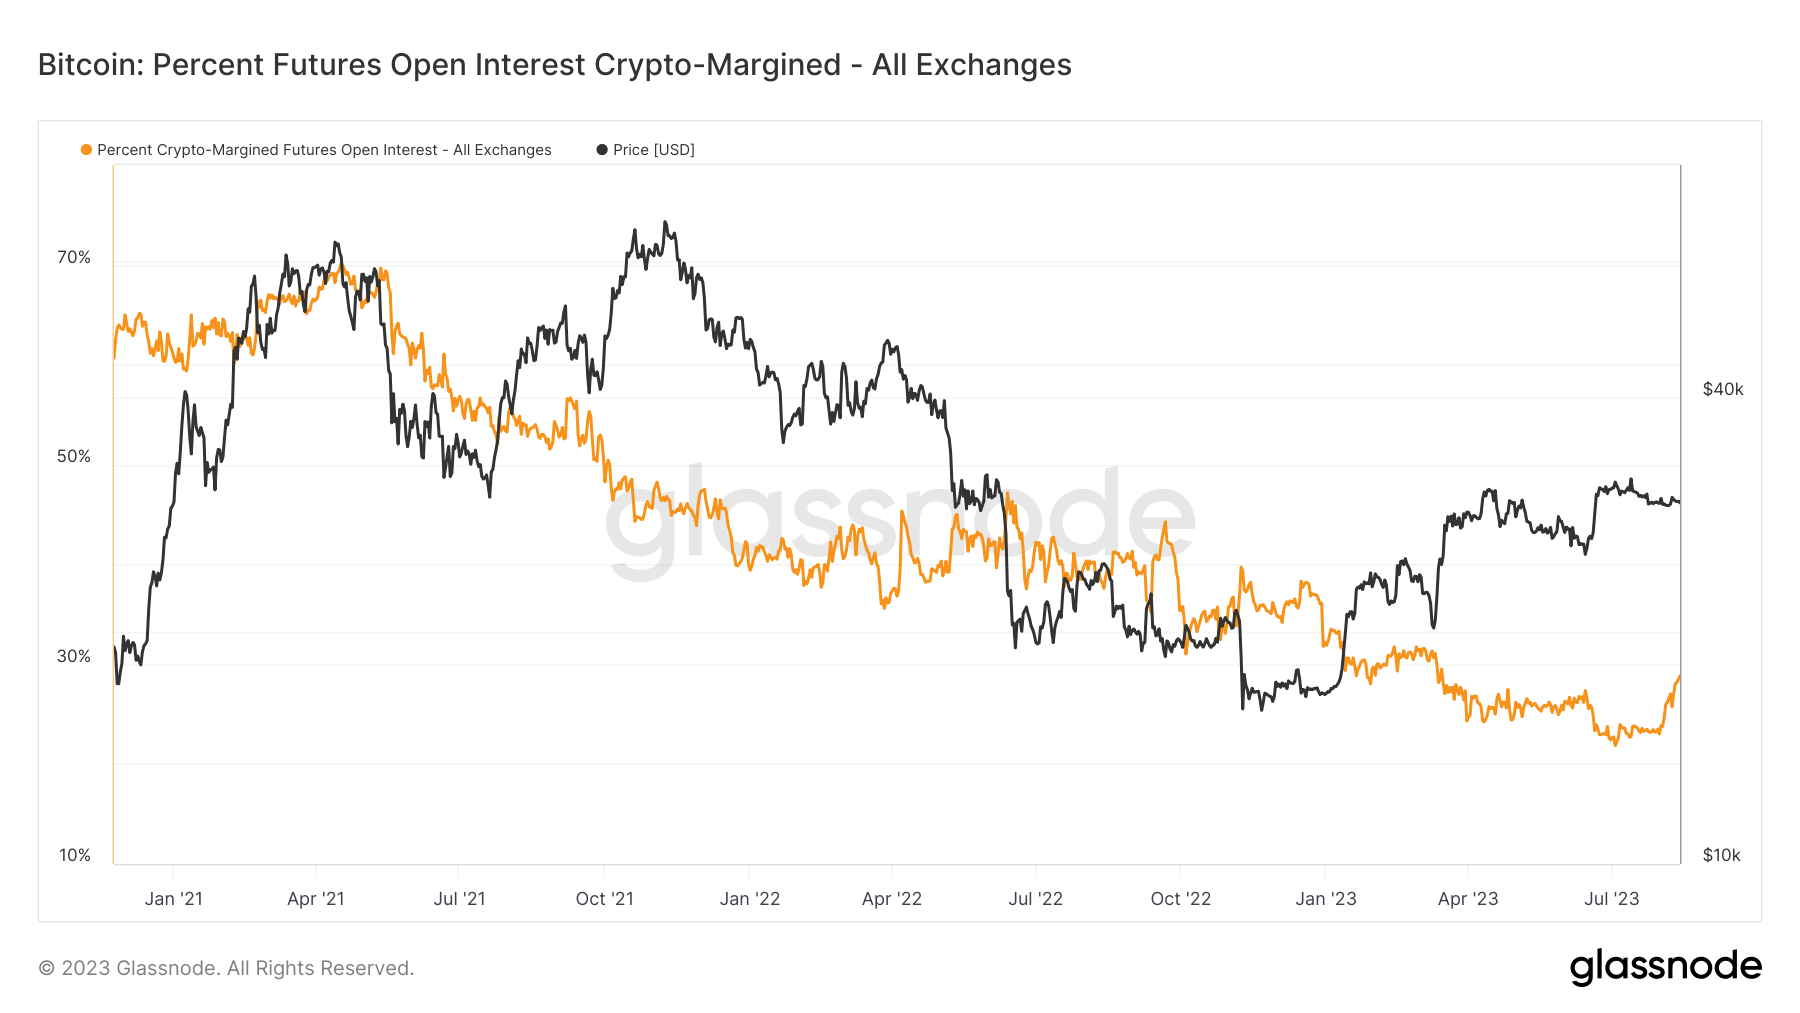 percent of crypto-margined futures open interest all